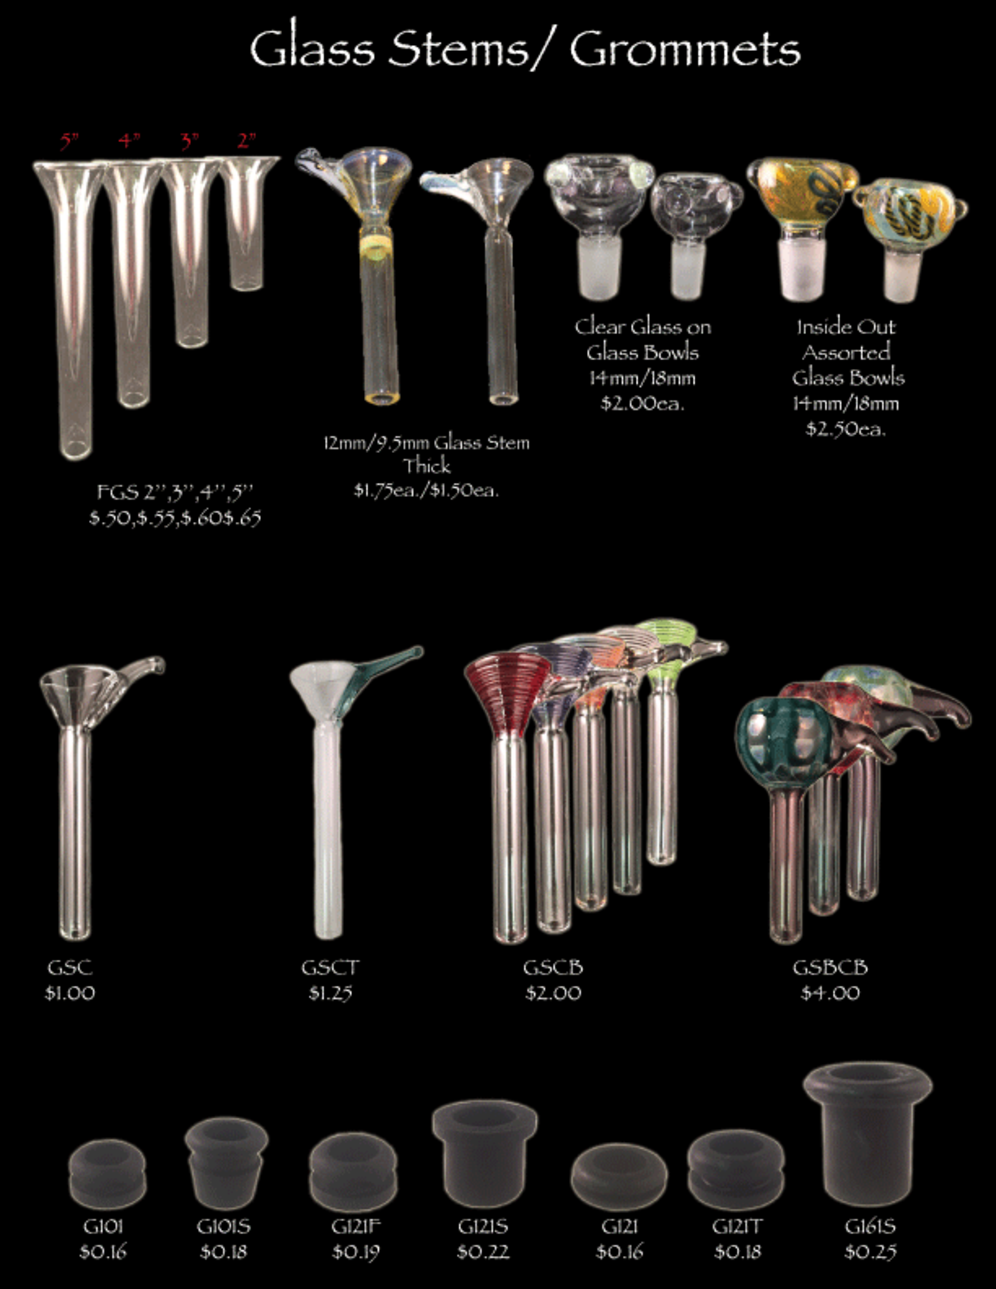 Water Pipes Glass Stems, Glass Bowls, Grommets